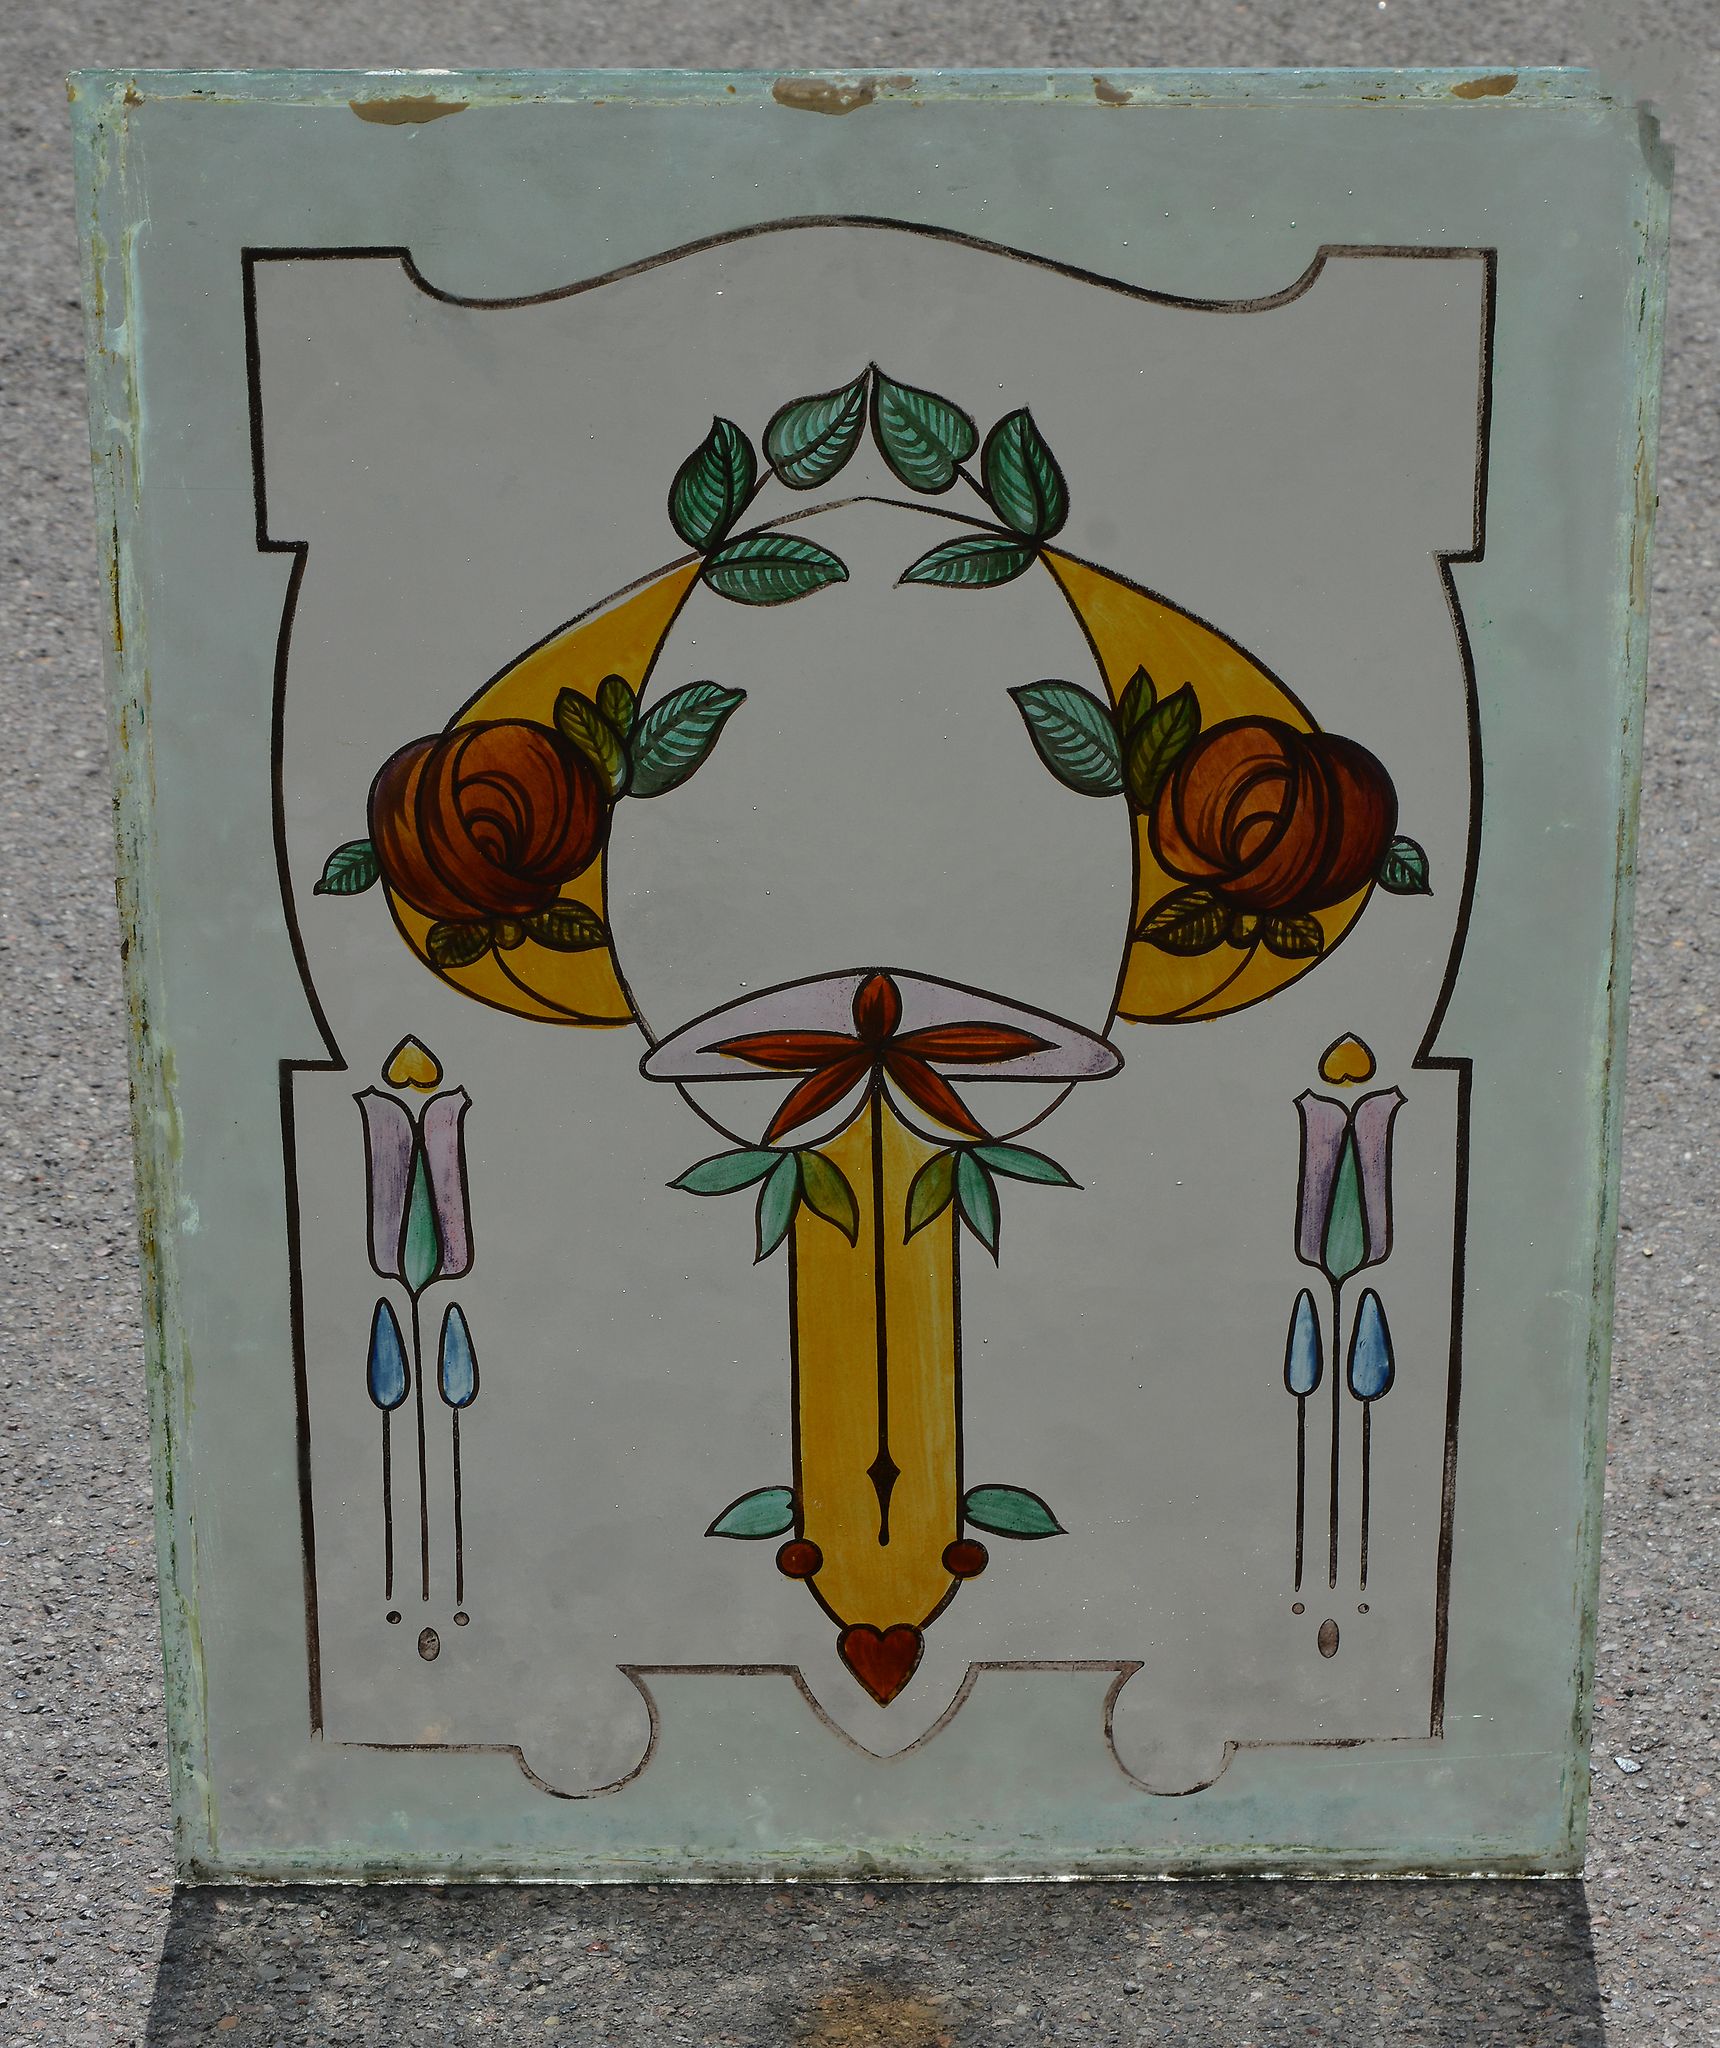 Five Arts and Crafts painted glass window panels, one 62.5cm x 82cm, in the original window frame; - Image 2 of 2